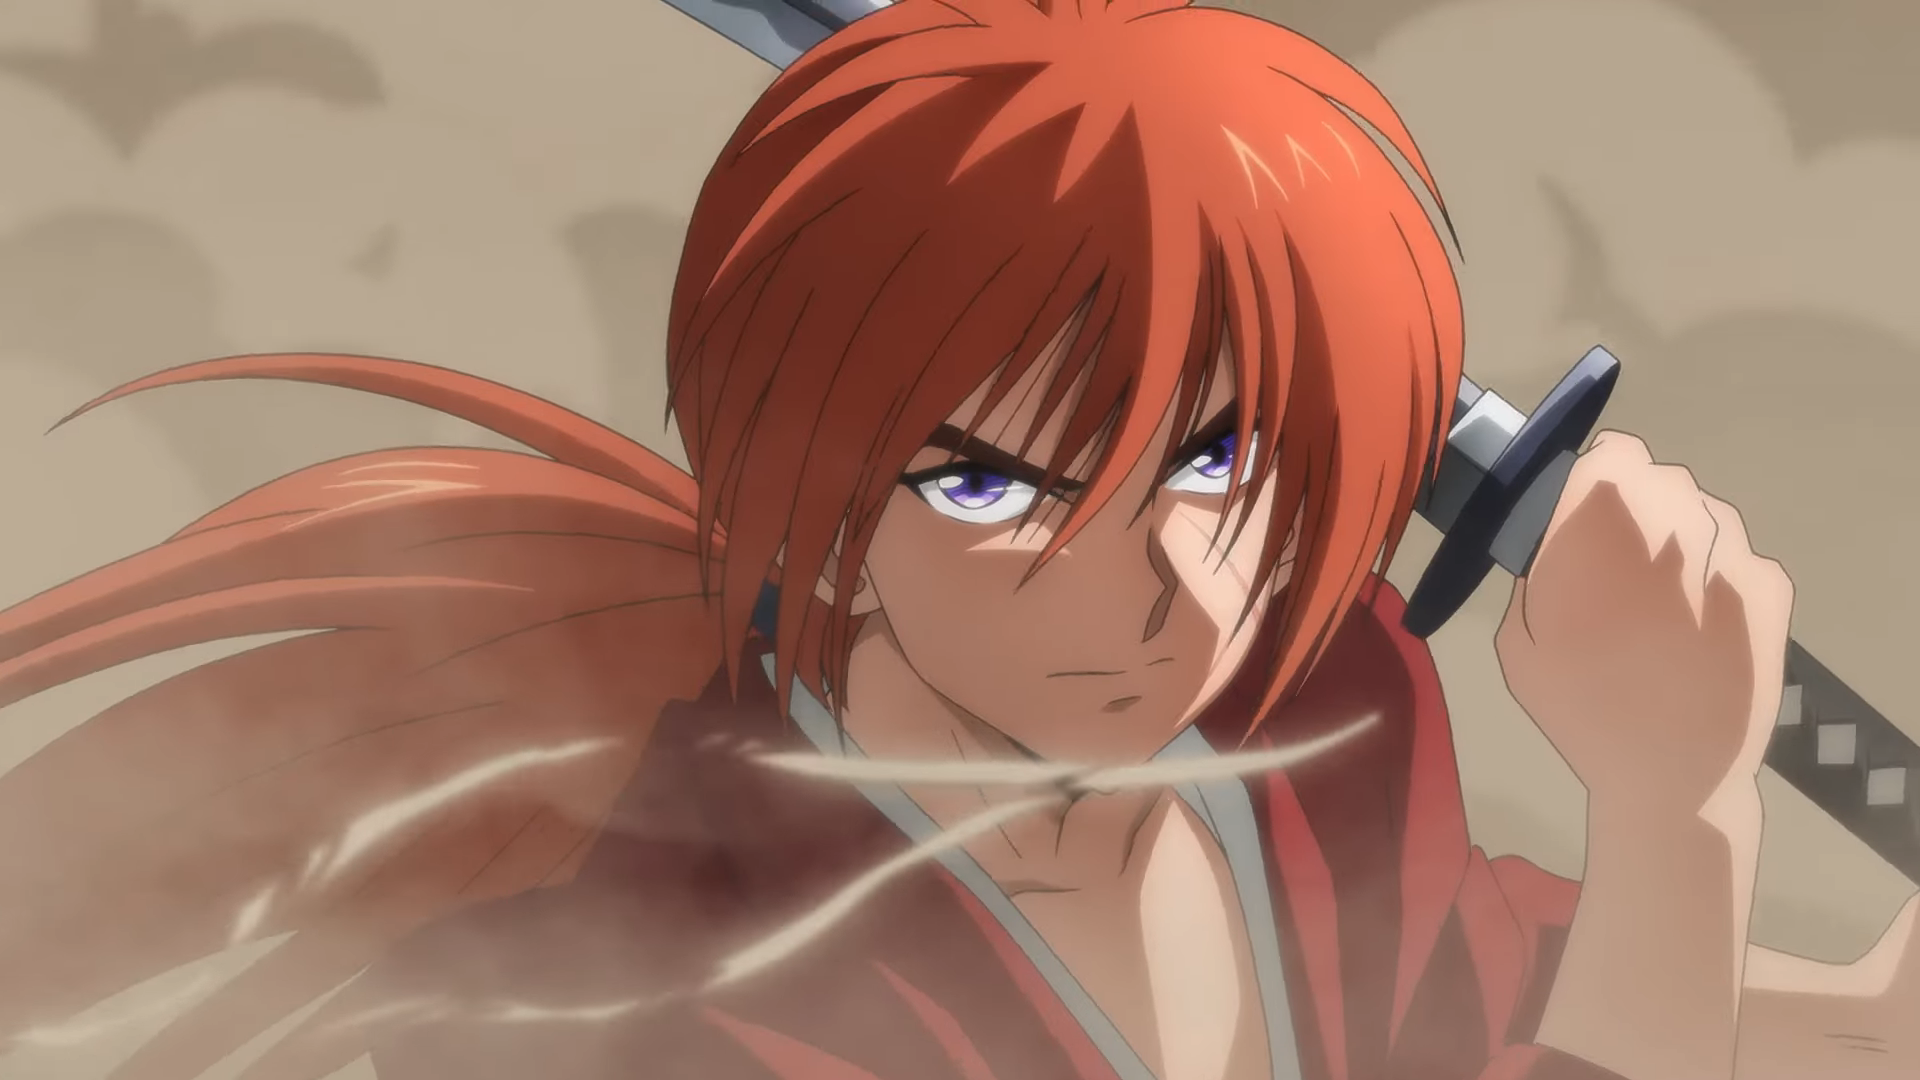 Rurouni Kenshin's Epic Return: What You Need to Know About the Anime's Upcoming Season 2